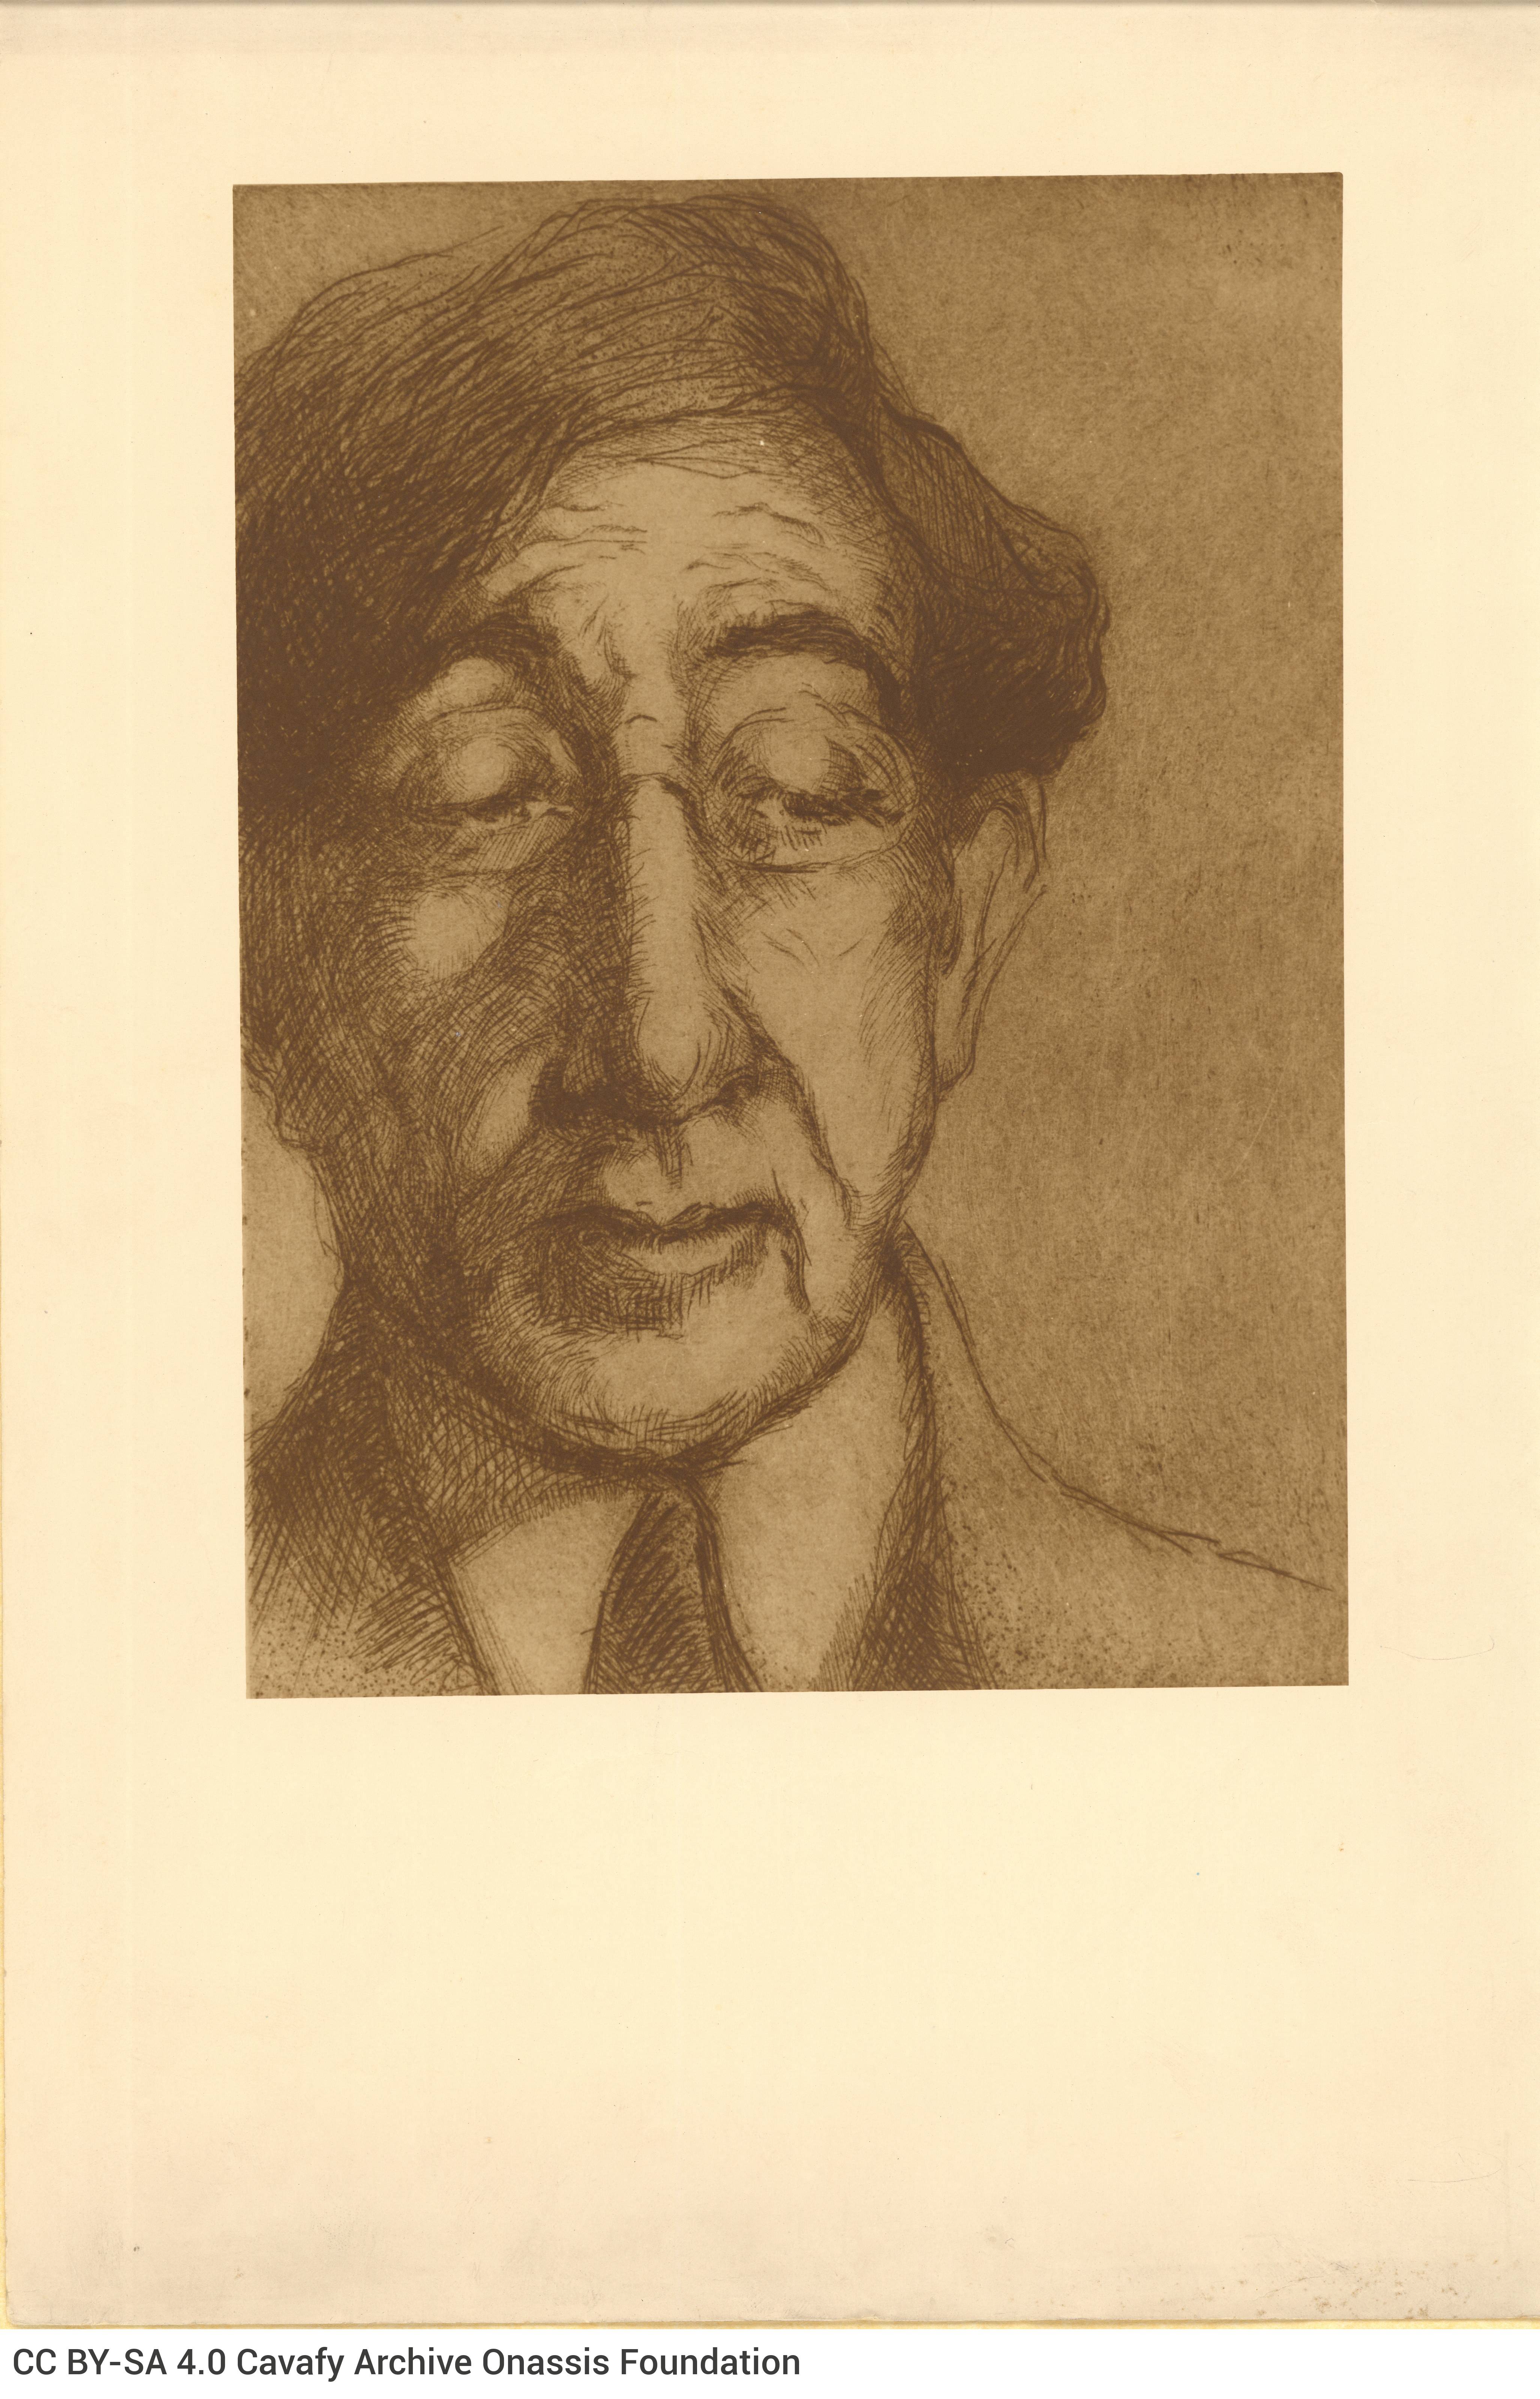 Reproduction of an etching by the engraver Jean Kefalinos, depicting Cavafy in 1921. Accompanied by a large-size photograph o